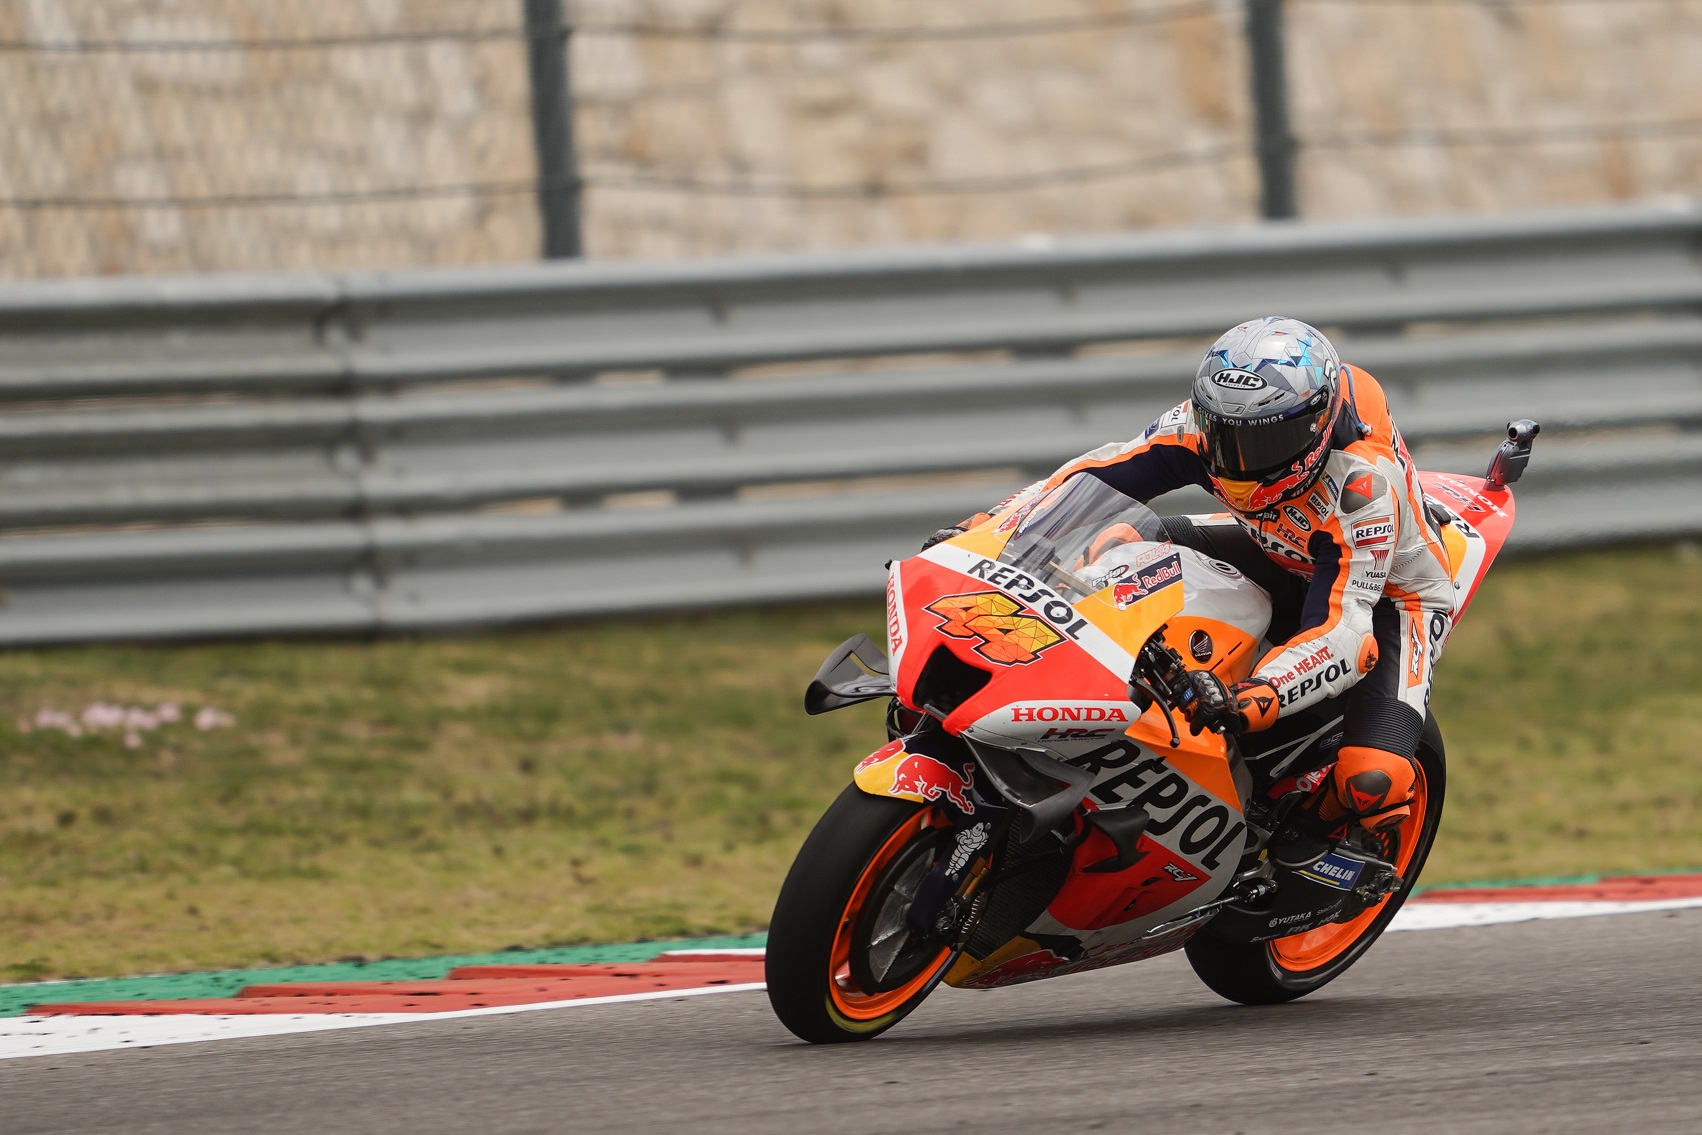 marquez-steals-the-show-in-austin-with-scintillating-recovery